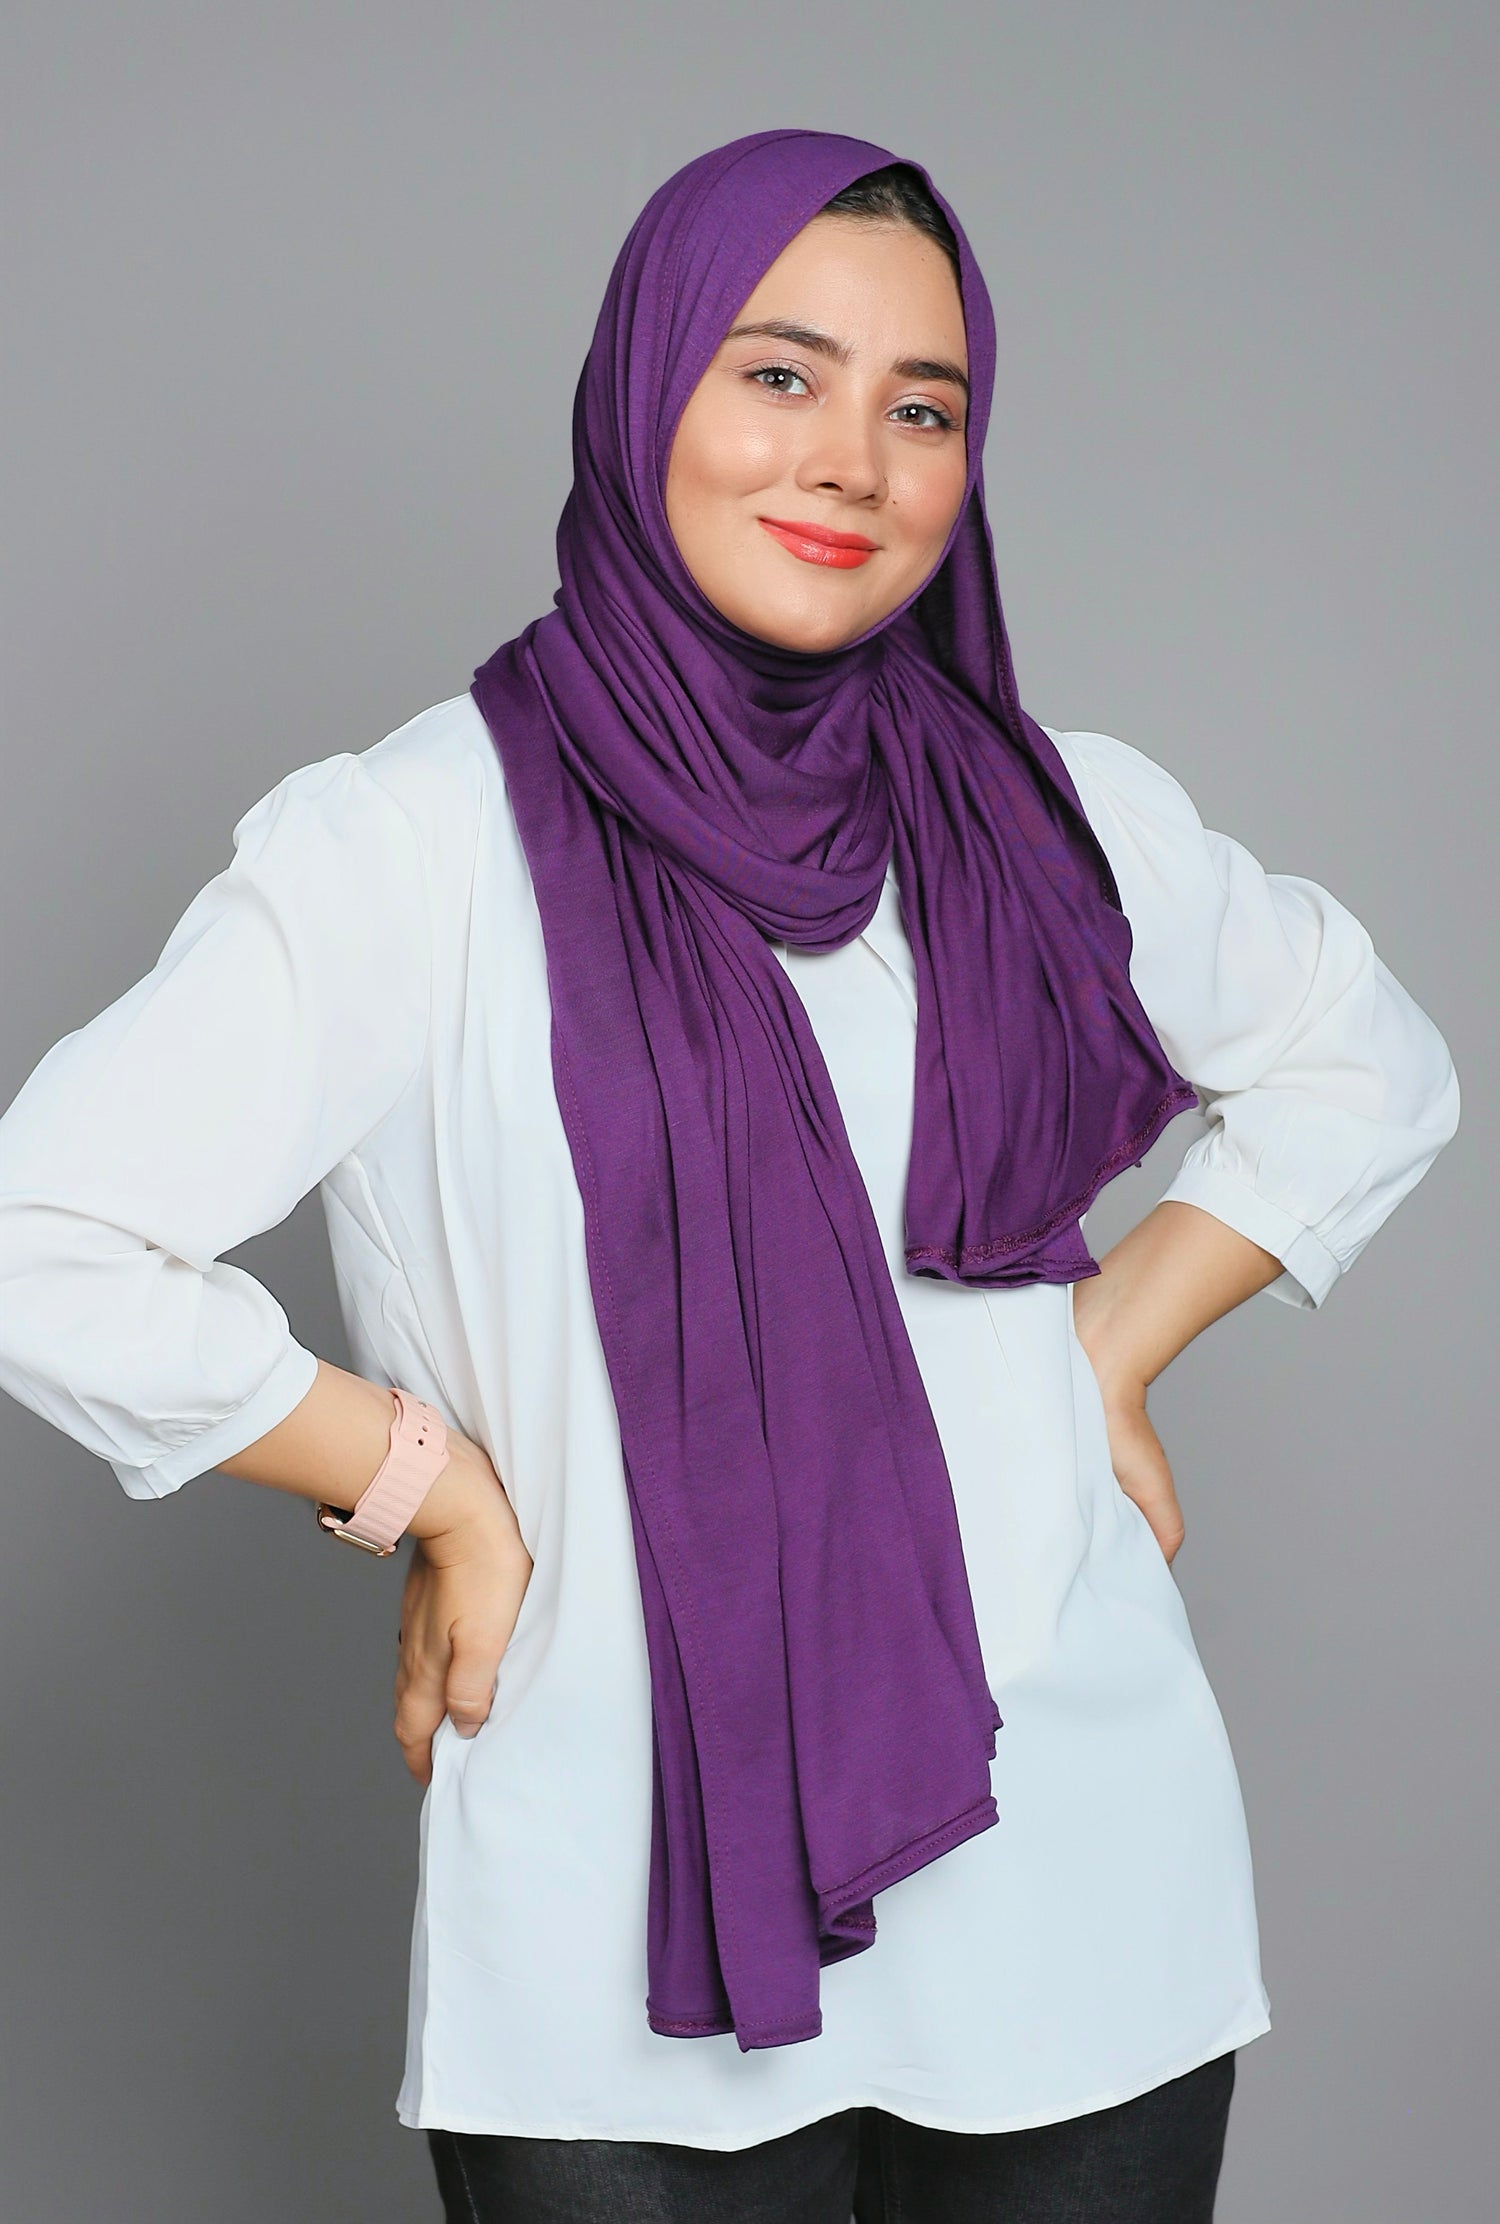 Jersey Hijab in Violet